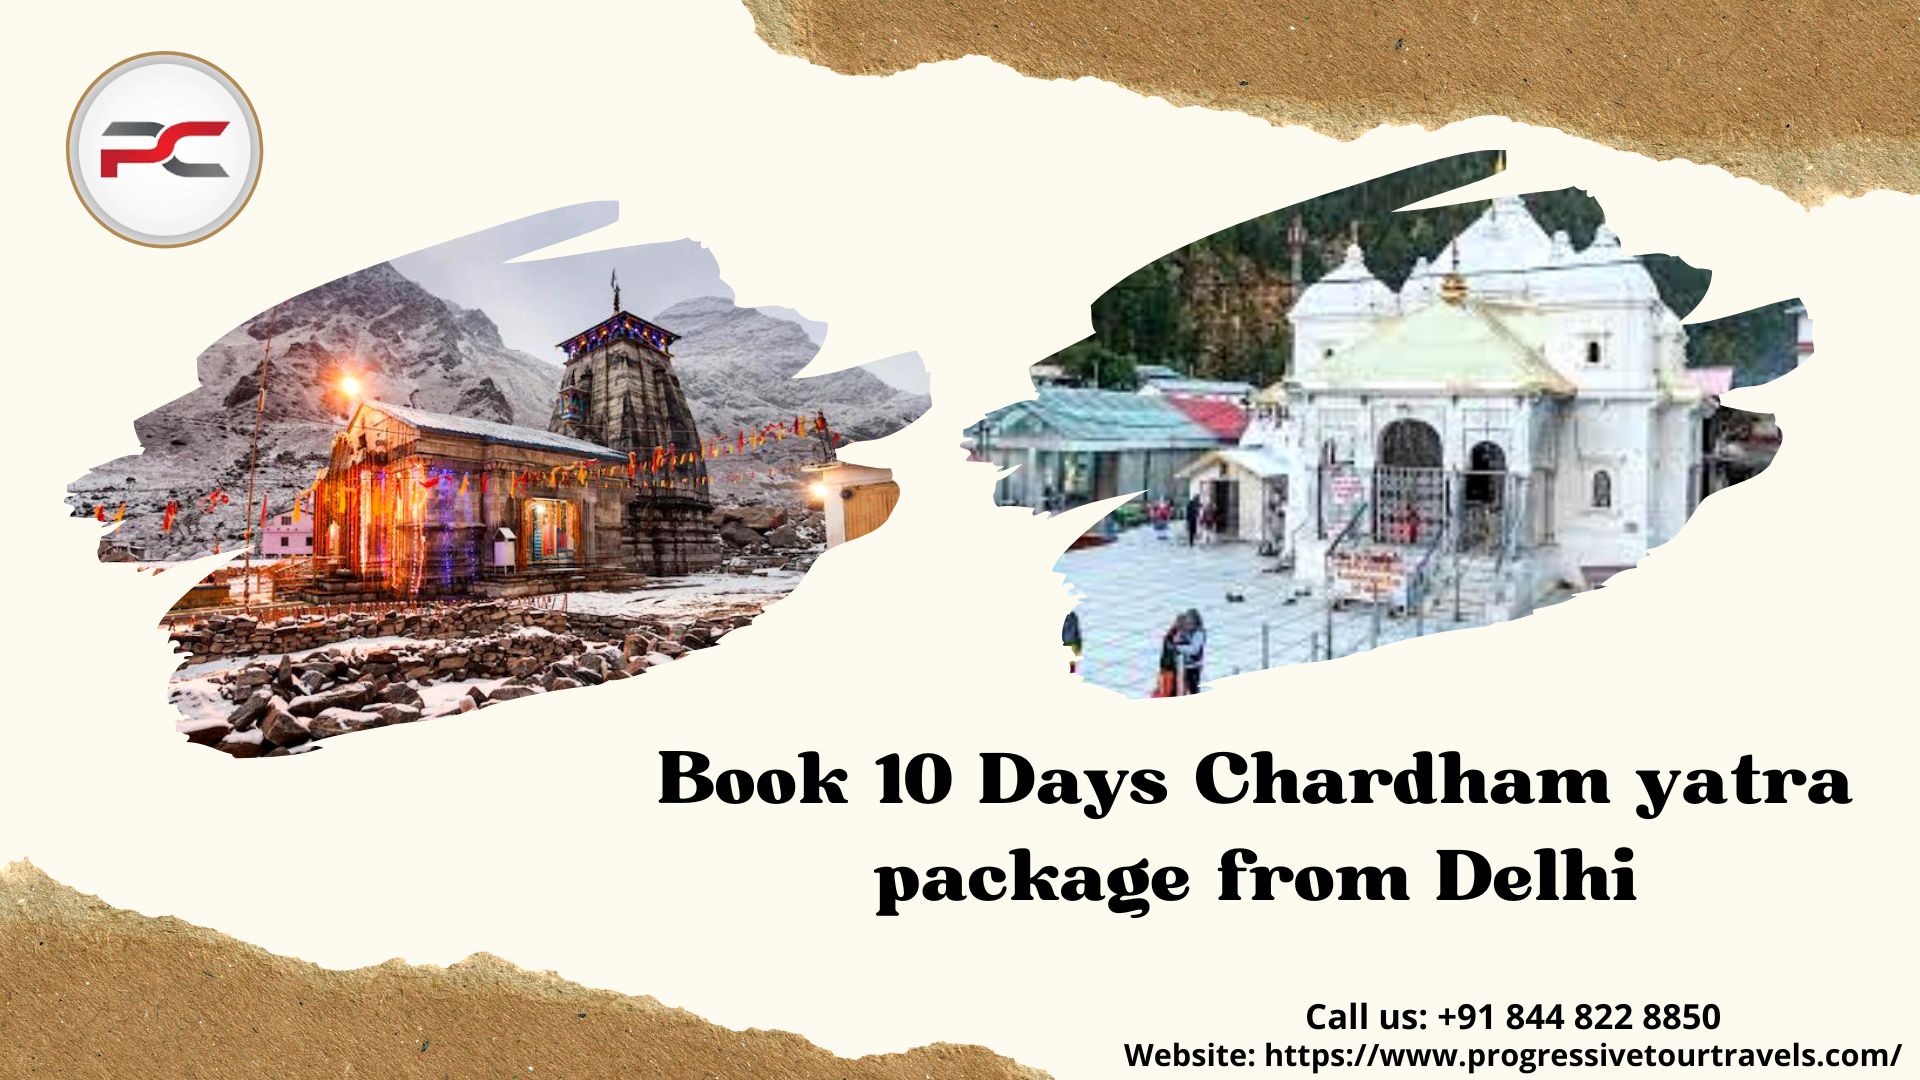 Book 10 Days Chardham yatra package from Delhi-59a0efaa